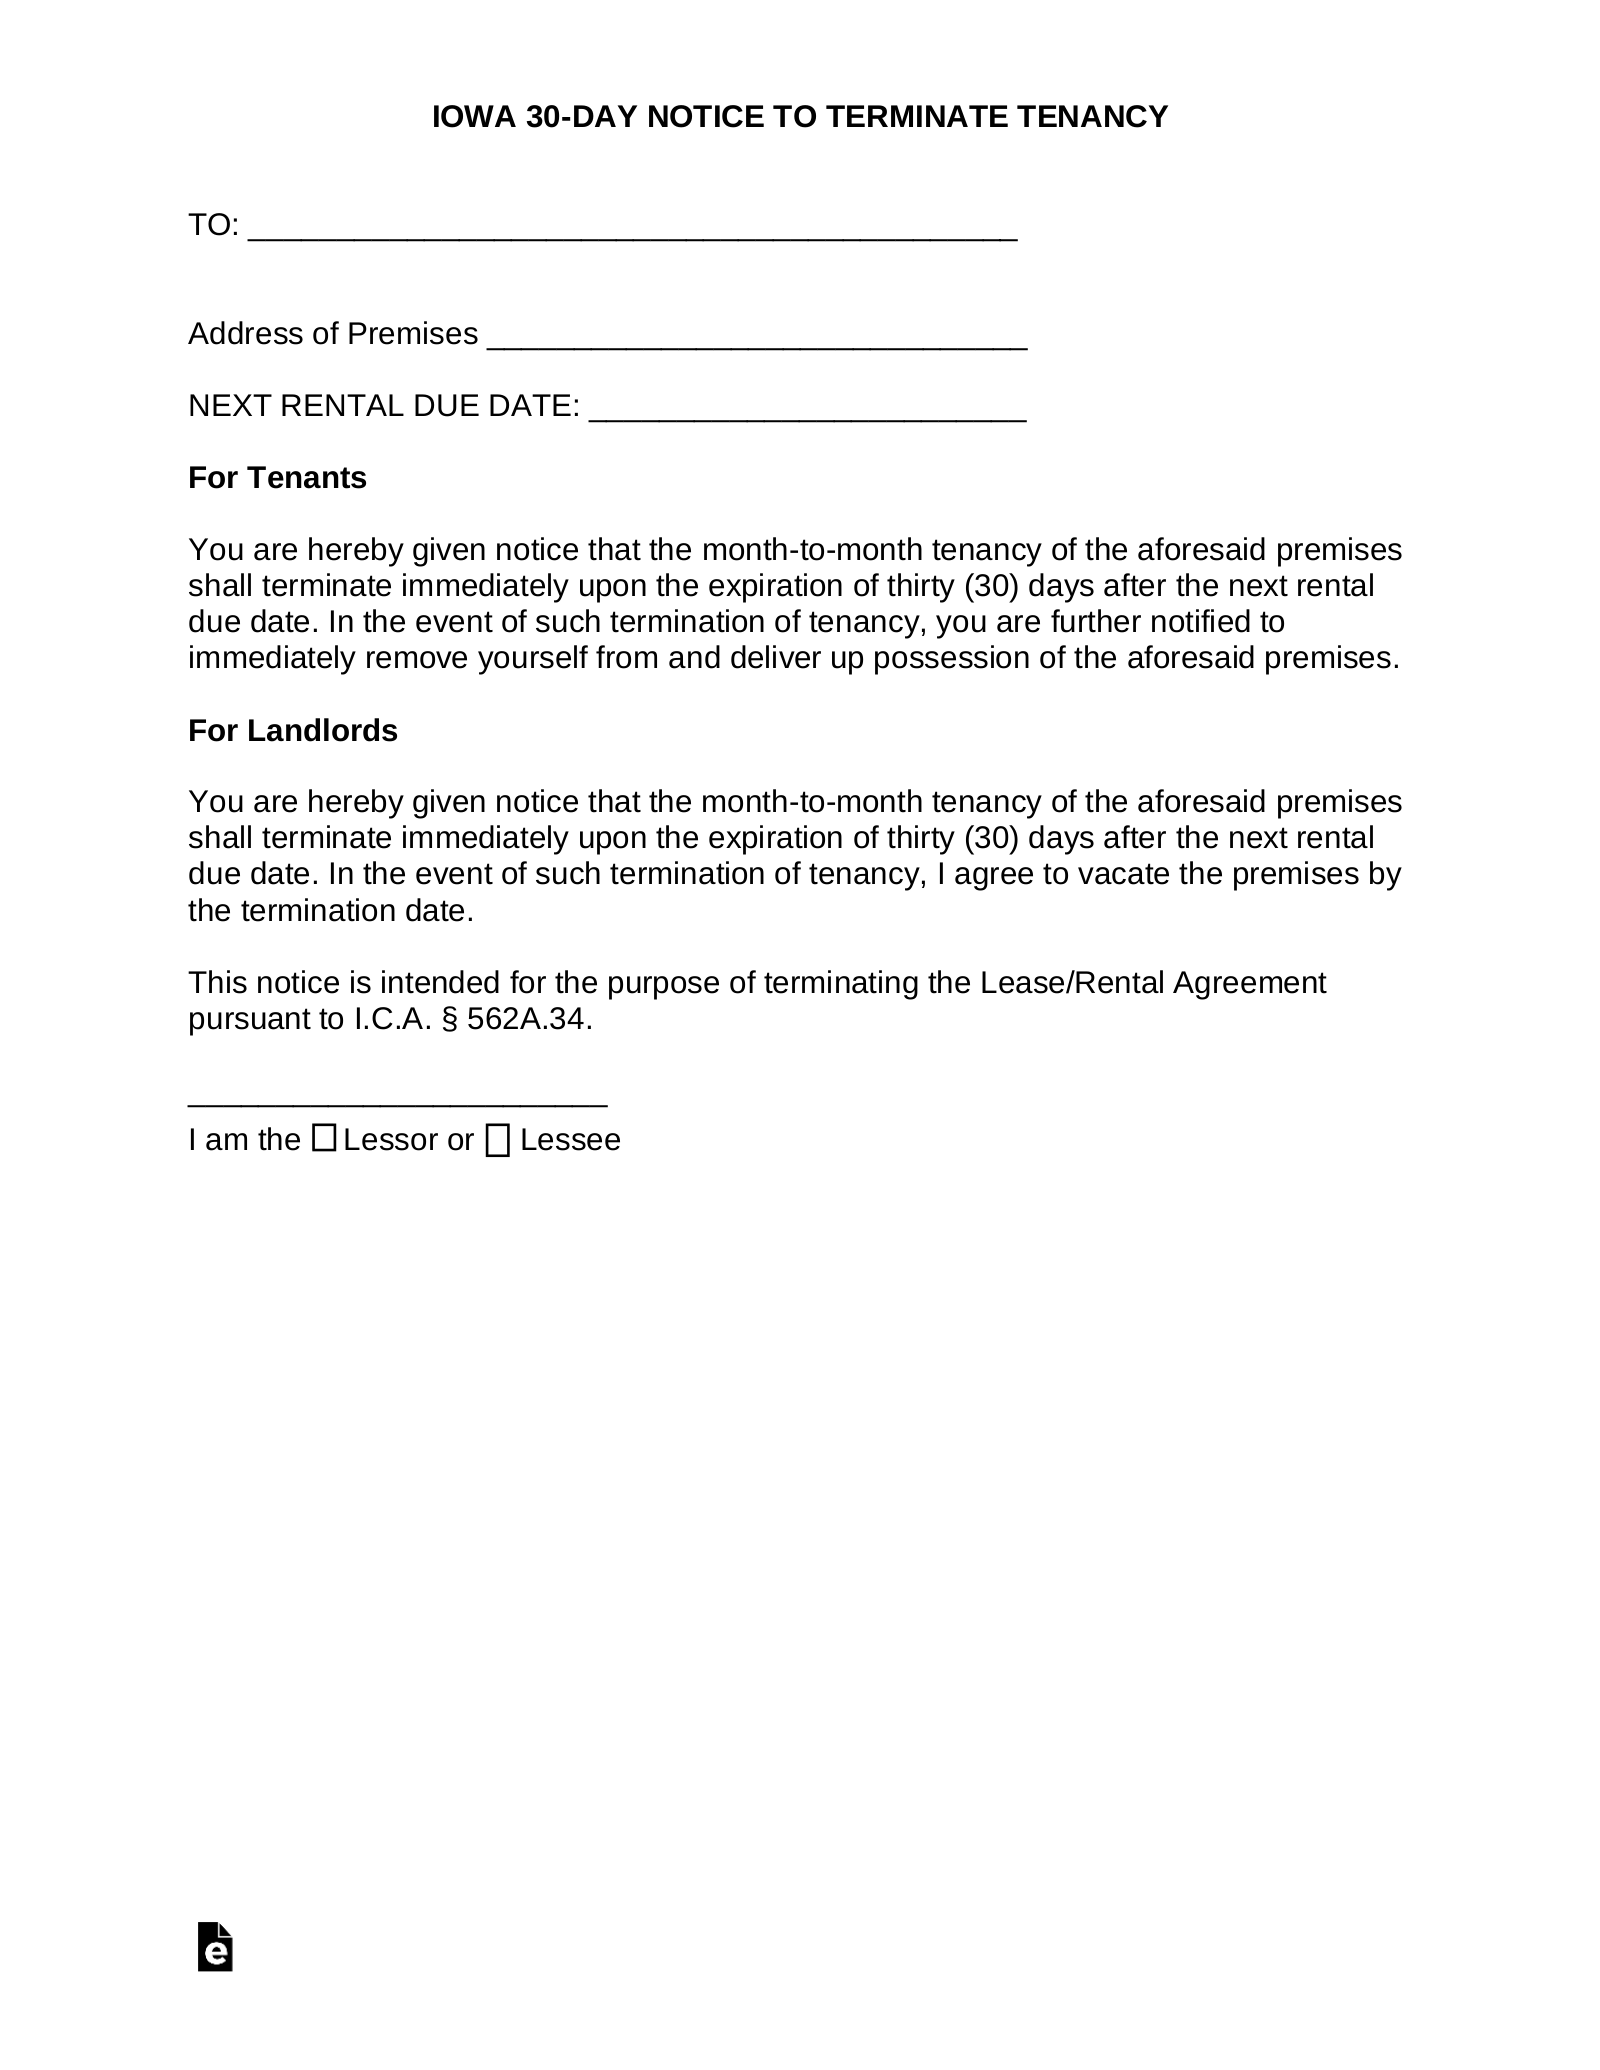 Thirty Days Notice Letter from eforms.com